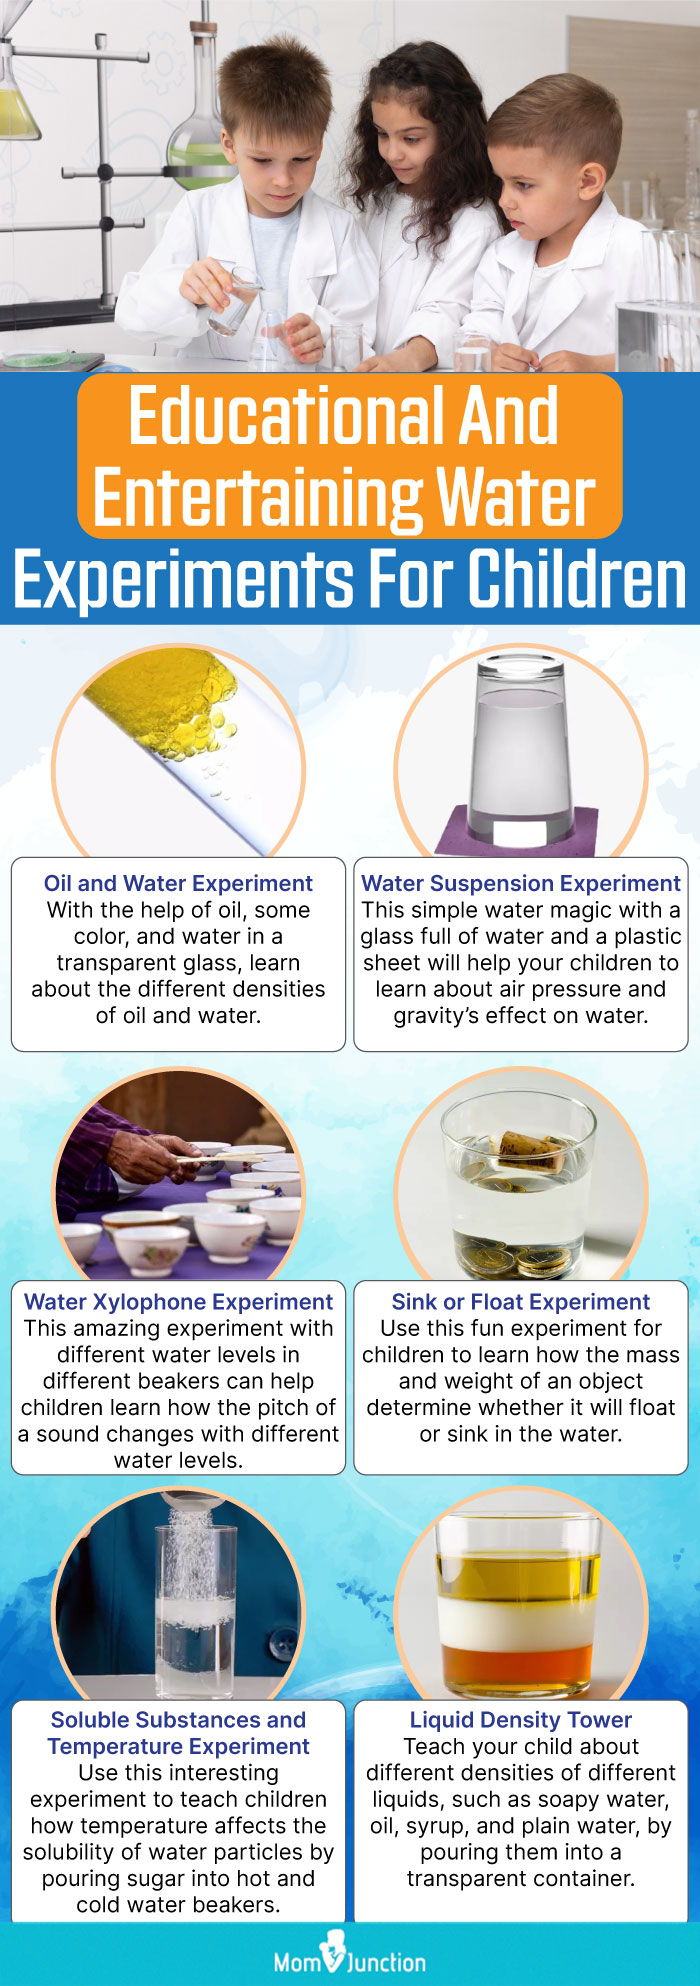 Educational And Entertaining Water Experiments For Children (infographic)